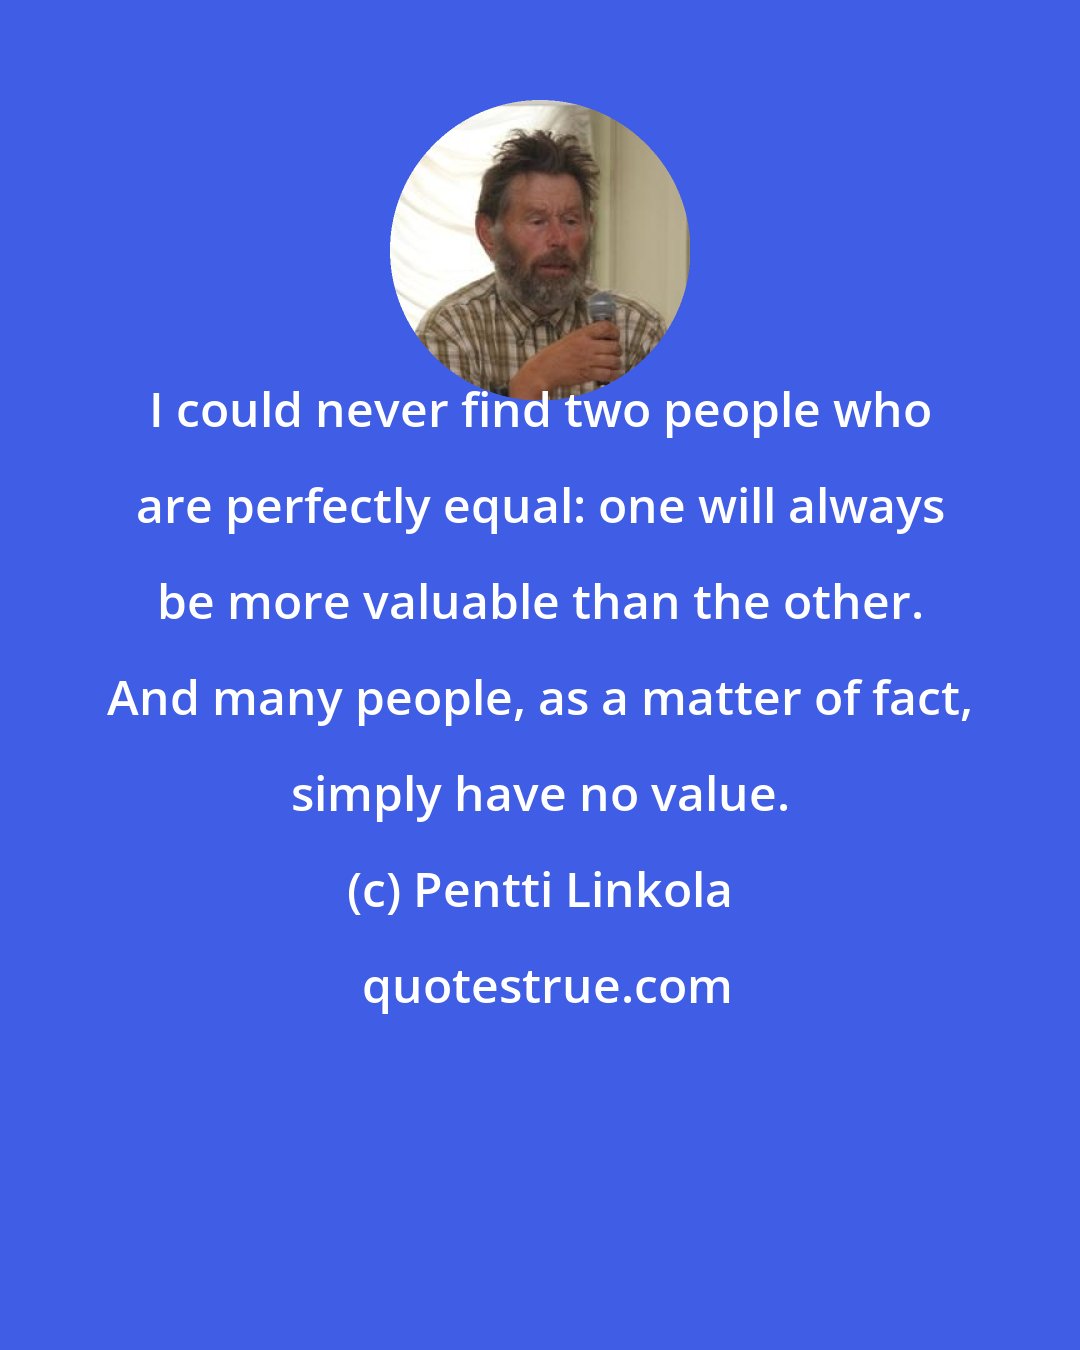 Pentti Linkola: I could never find two people who are perfectly equal: one will always be more valuable than the other. And many people, as a matter of fact, simply have no value.